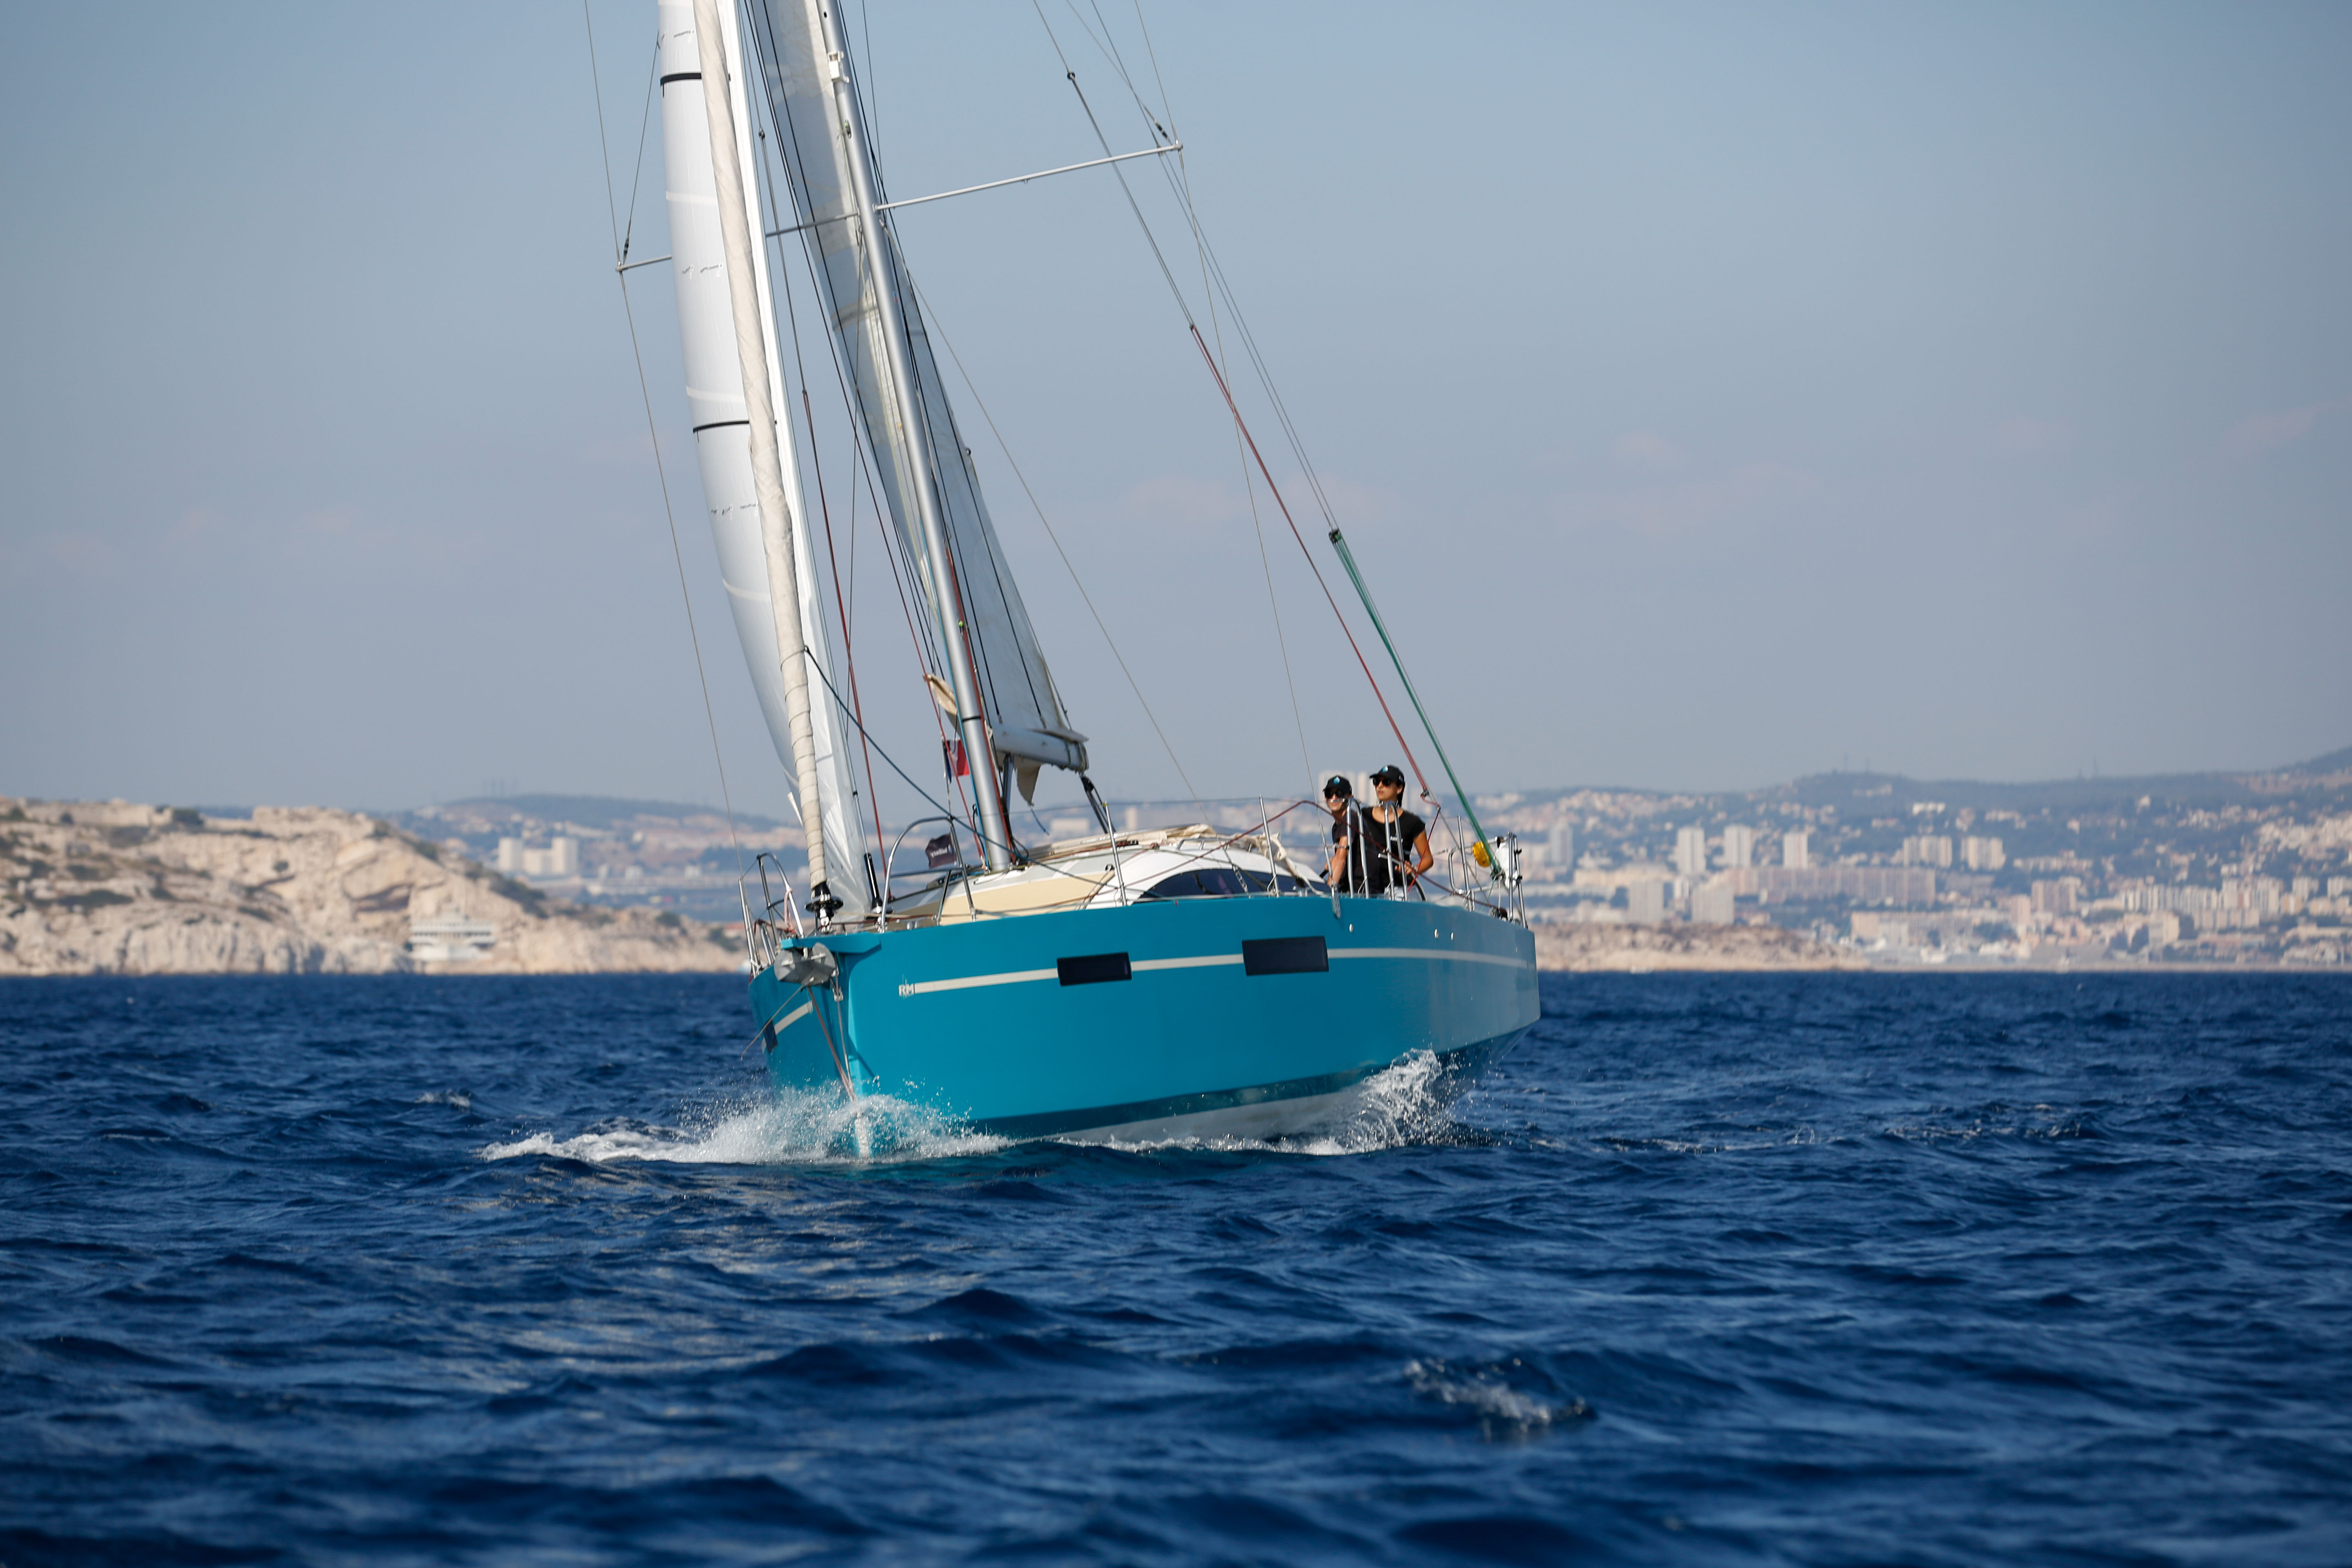 RM 1070 - Yacht Charter Marseille & Boat hire in France French Riviera Marseille Marseille Marina Vieux Port 6